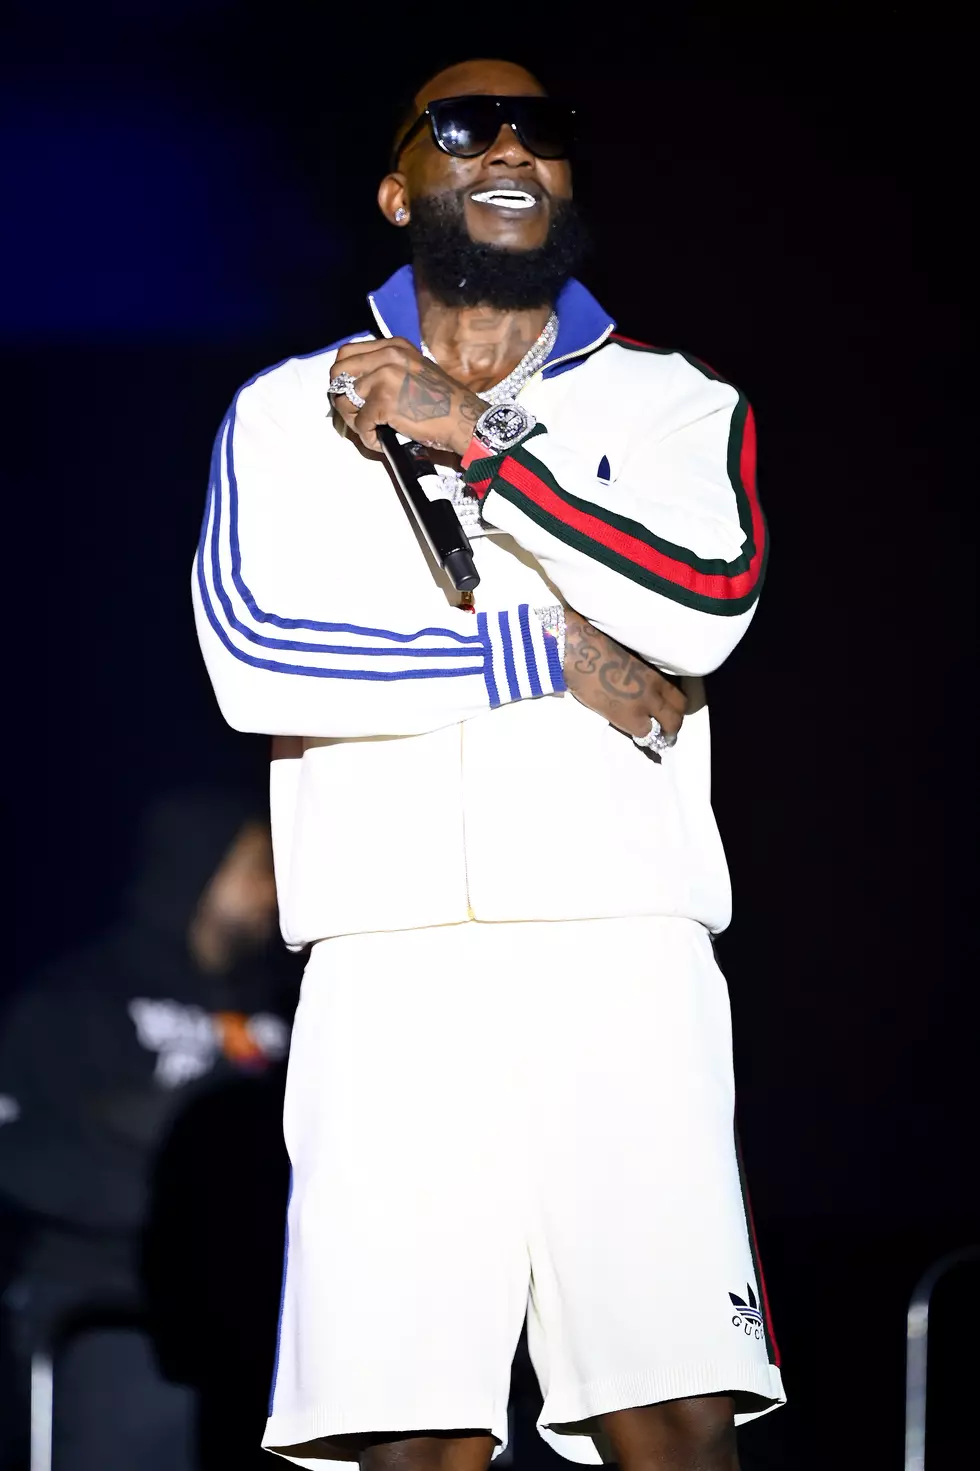 Gucci Mane performs on stage during Votelanta Music Festival at The Dome Atlanta on October 28, 2022 in Atlanta, Georgia.